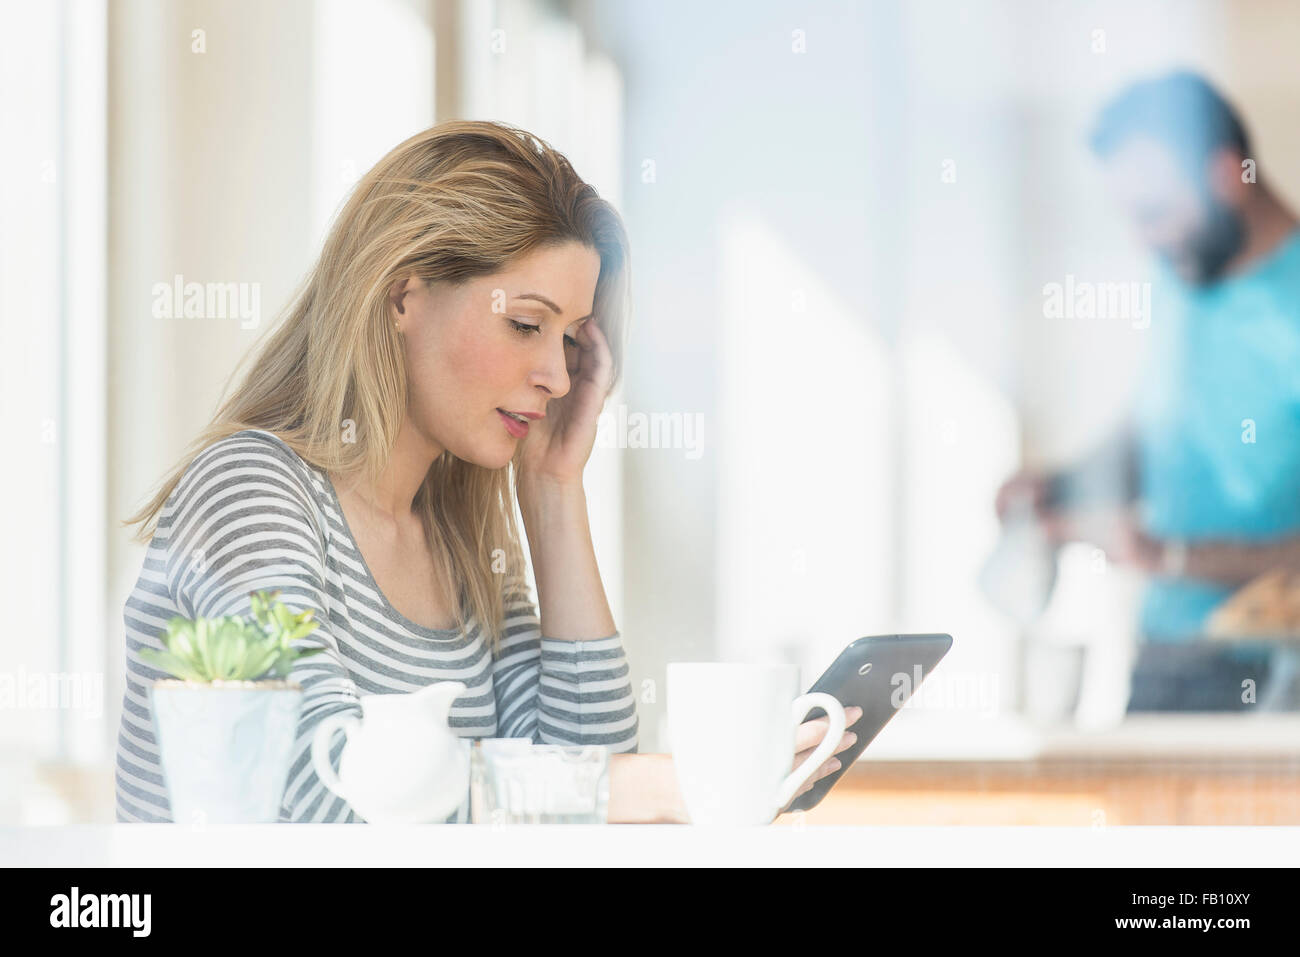 Young woman using tablet and man in background Stock Photo